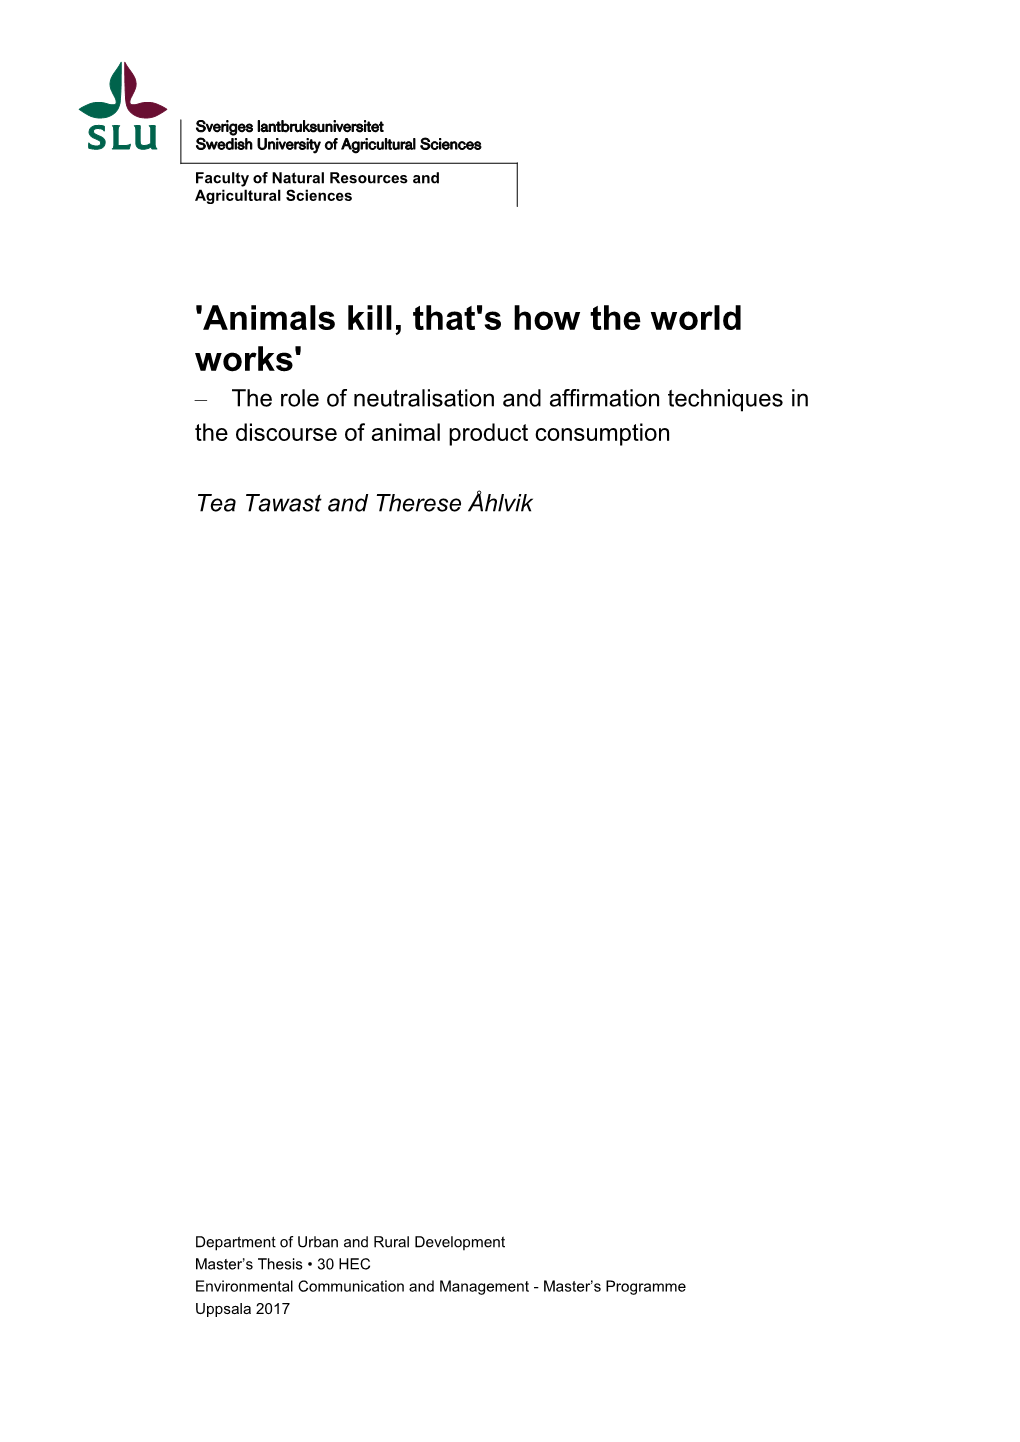 'Animals Kill, That's How the World Works' – the Role of Neutralisation and Affirmation Techniques in the Discourse of Animal Product Consumption